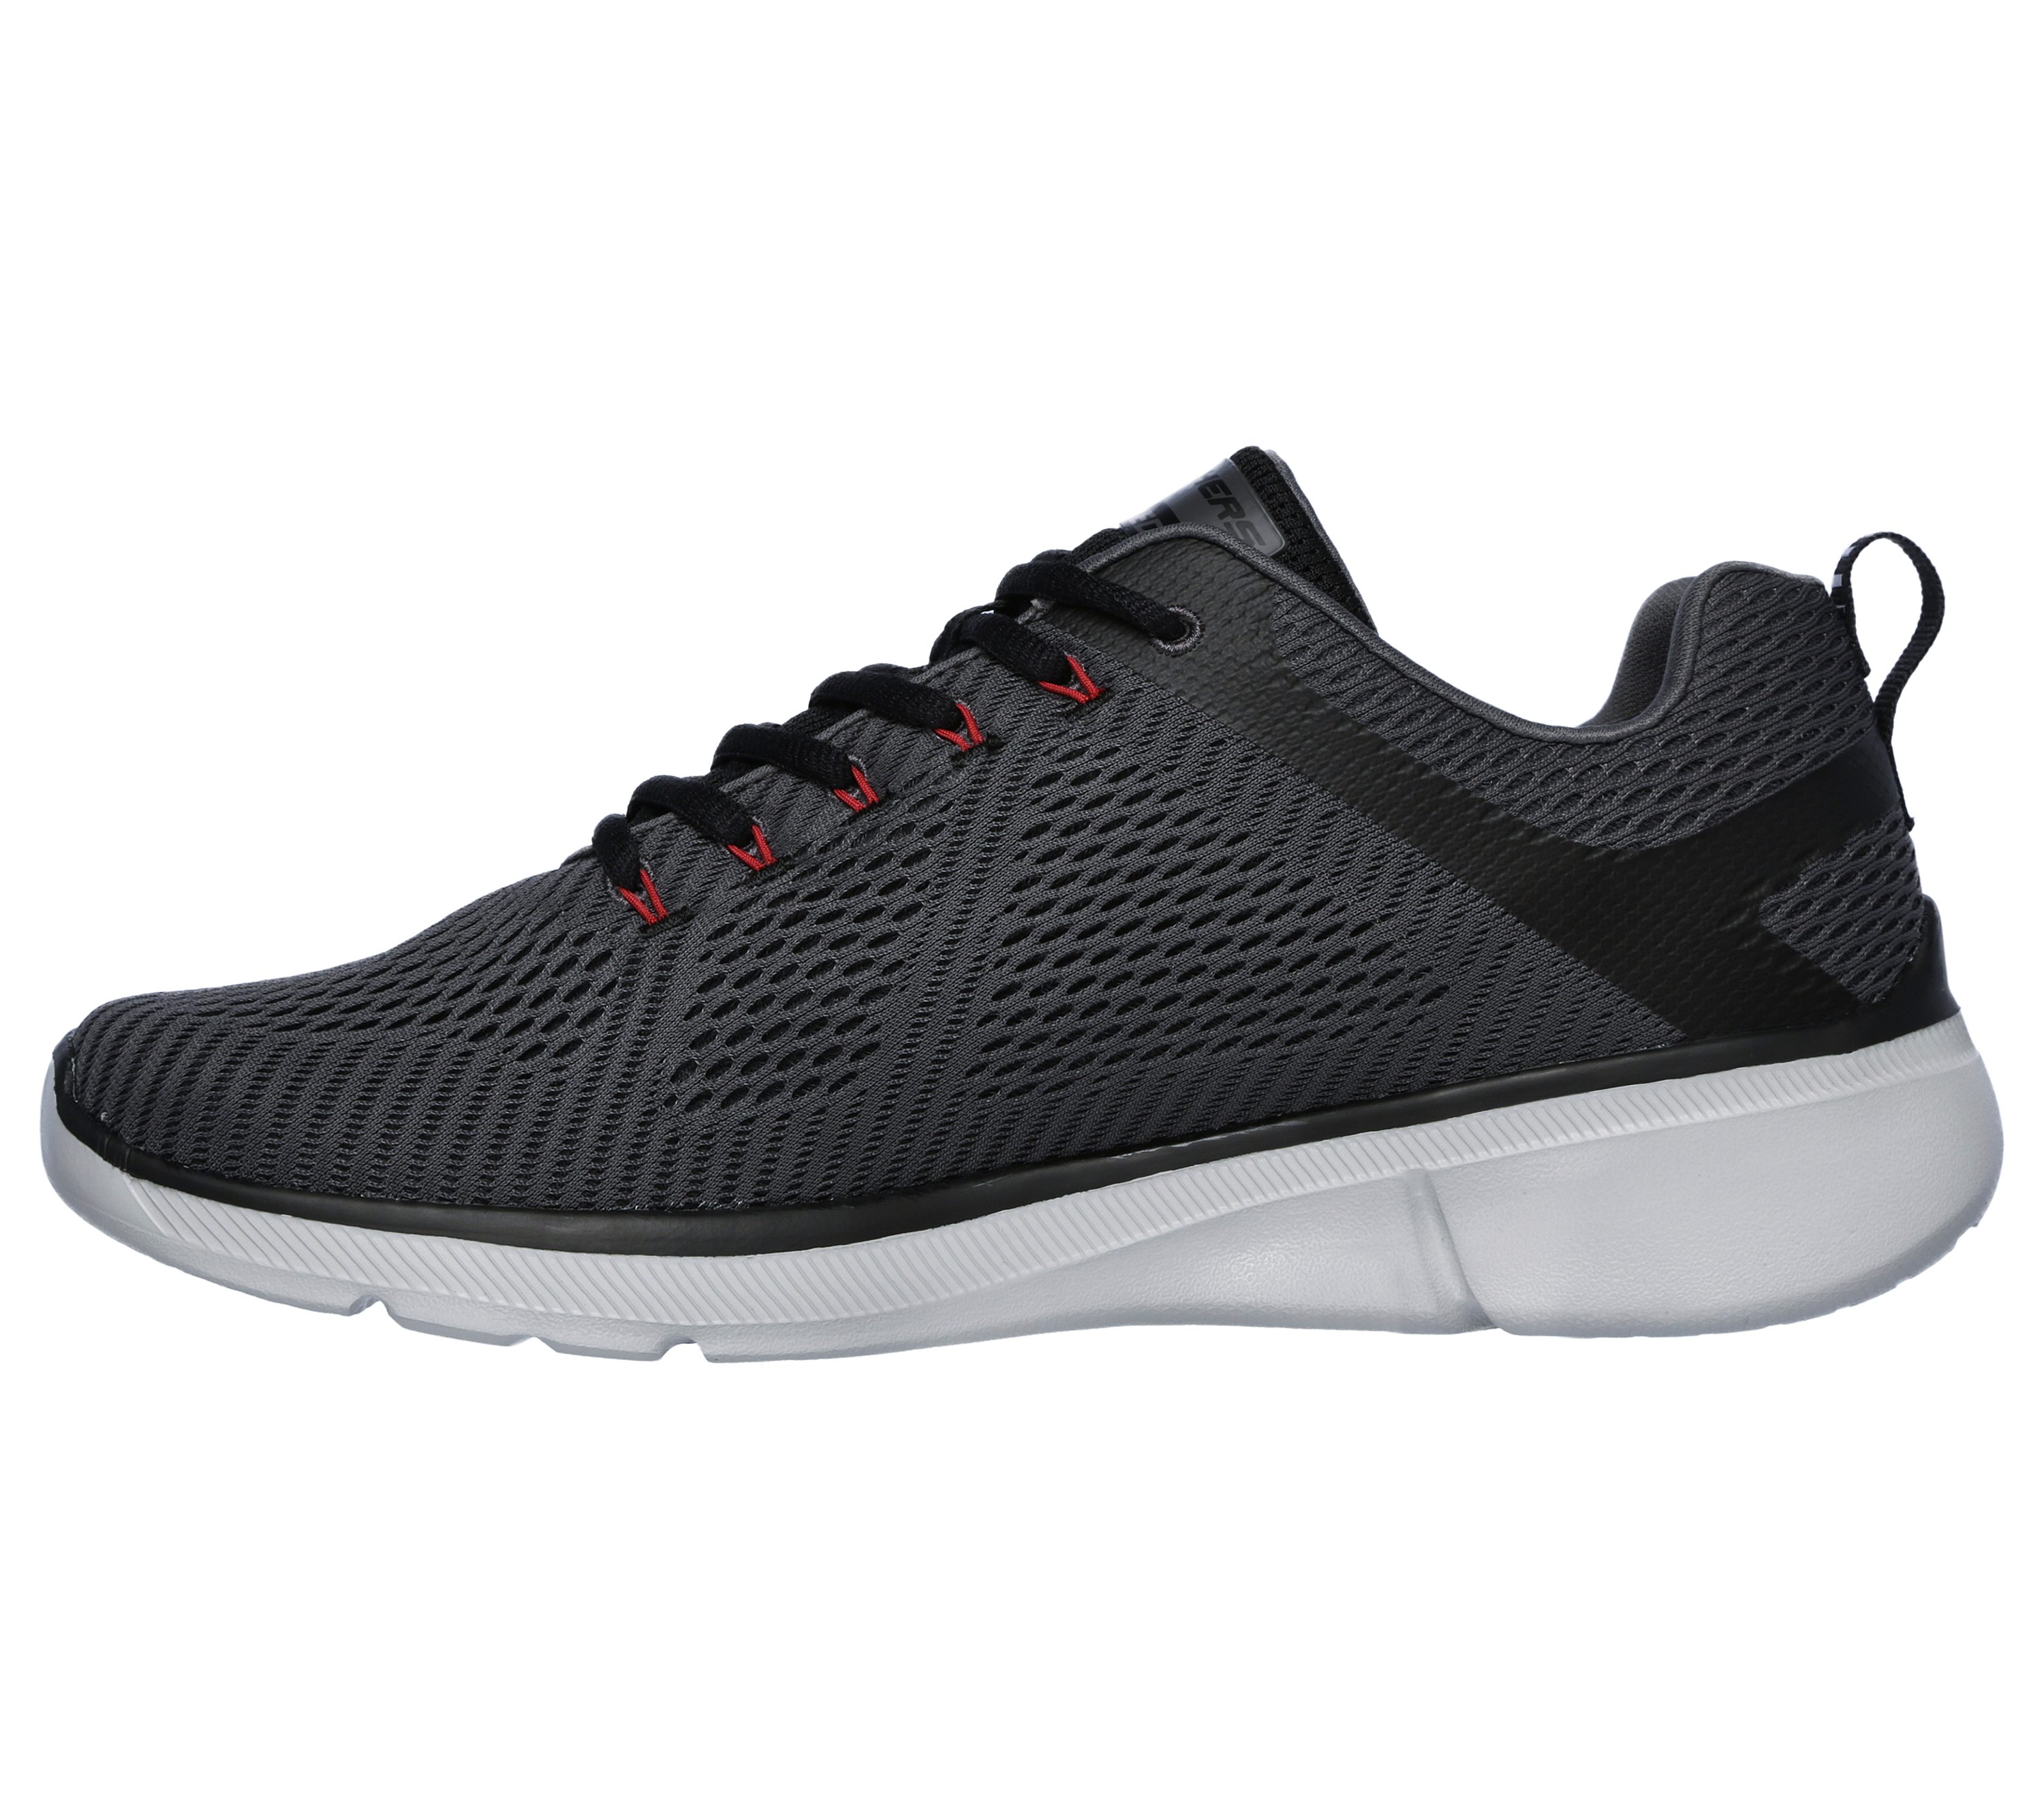 skechers equalizer 3.0 relaxed fit